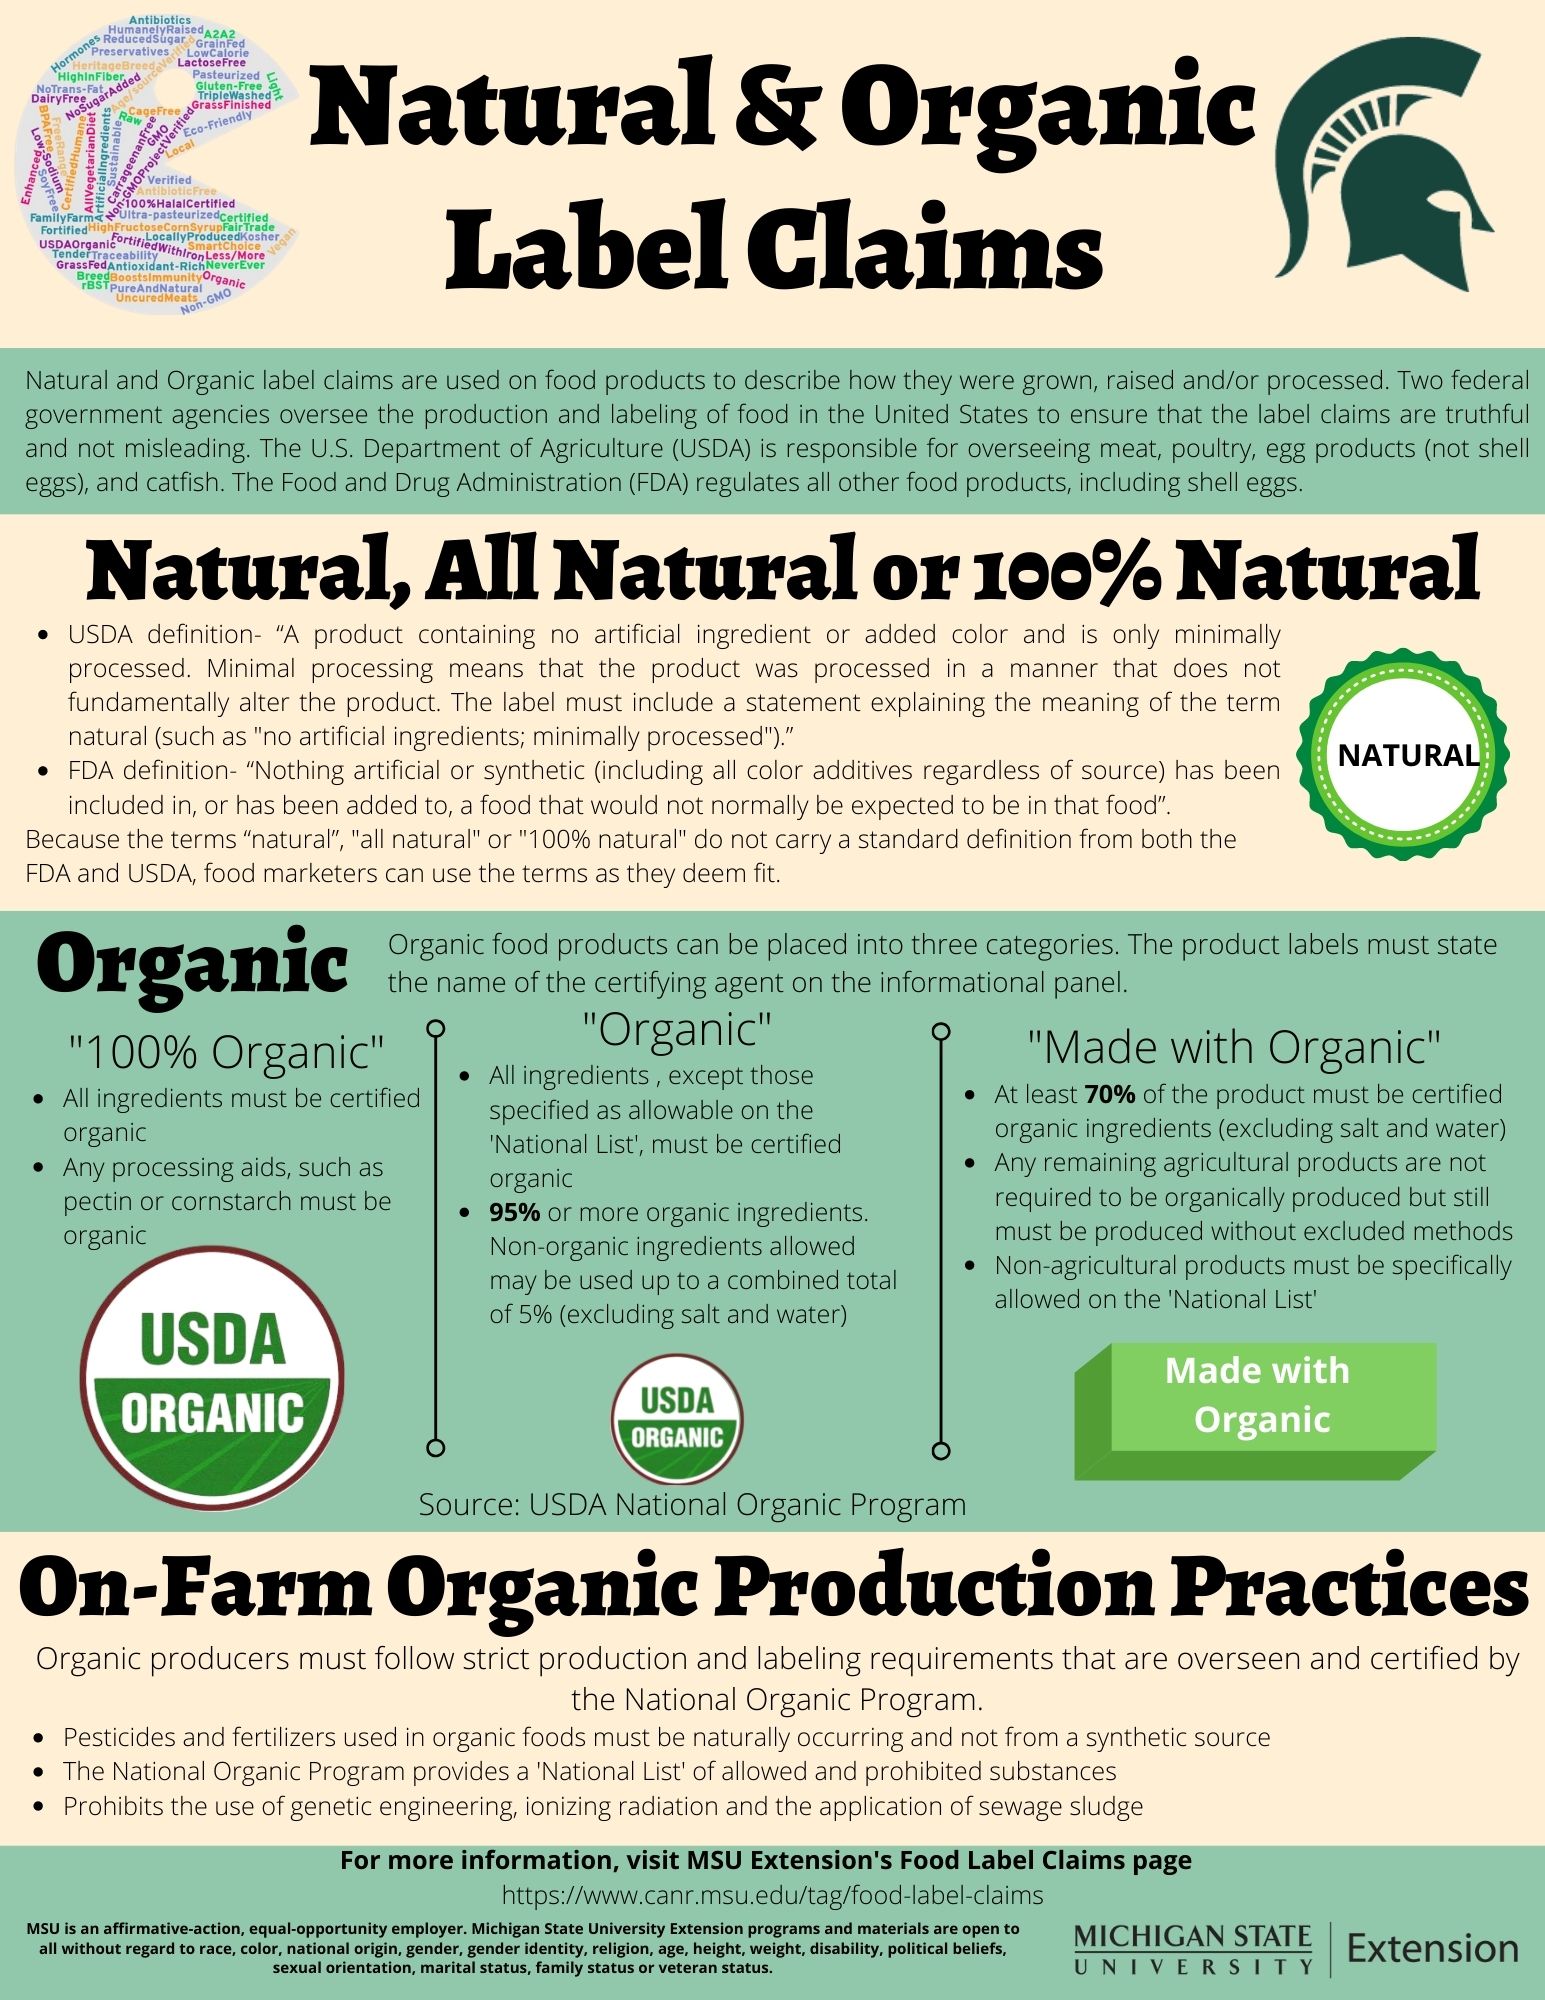 Natural and Organic Label Claims - Agriculture